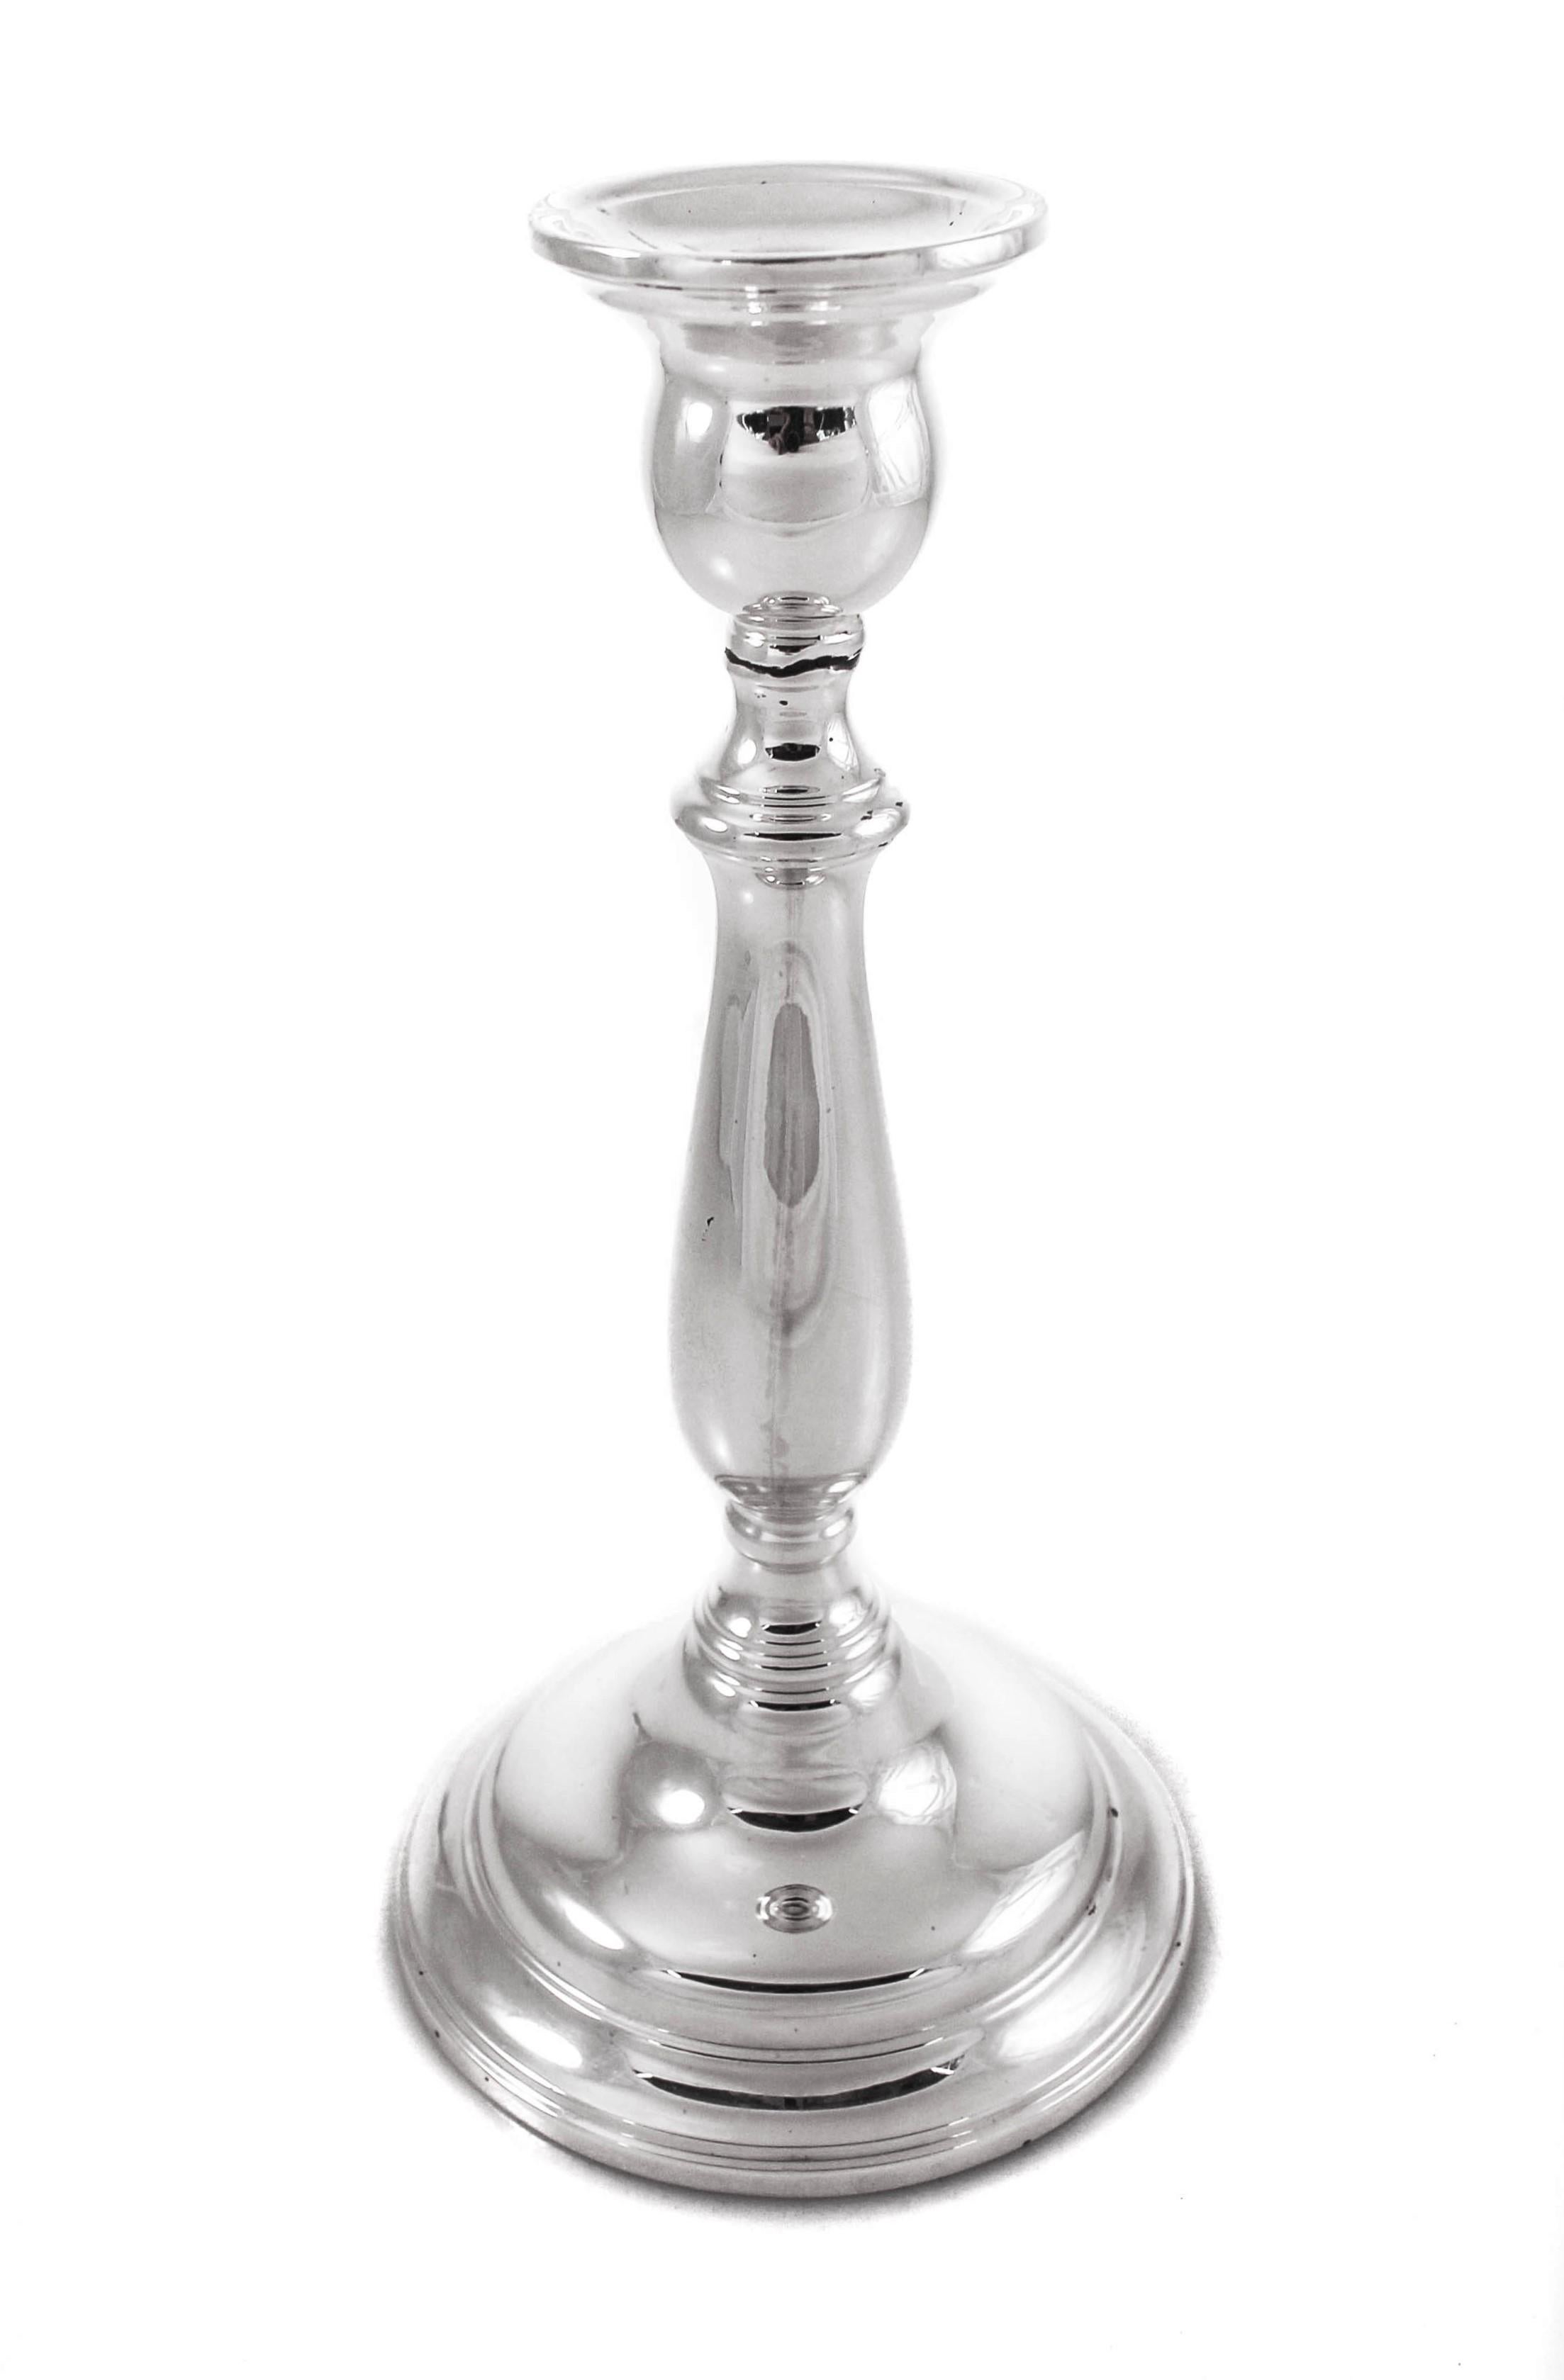 During and right after WWII, luxury items were not too common. And when they were, they were sparse and unadorned. These sterling silver candlesticks from that period are a perfect example; simple and understated. They have a pretty silhouette and